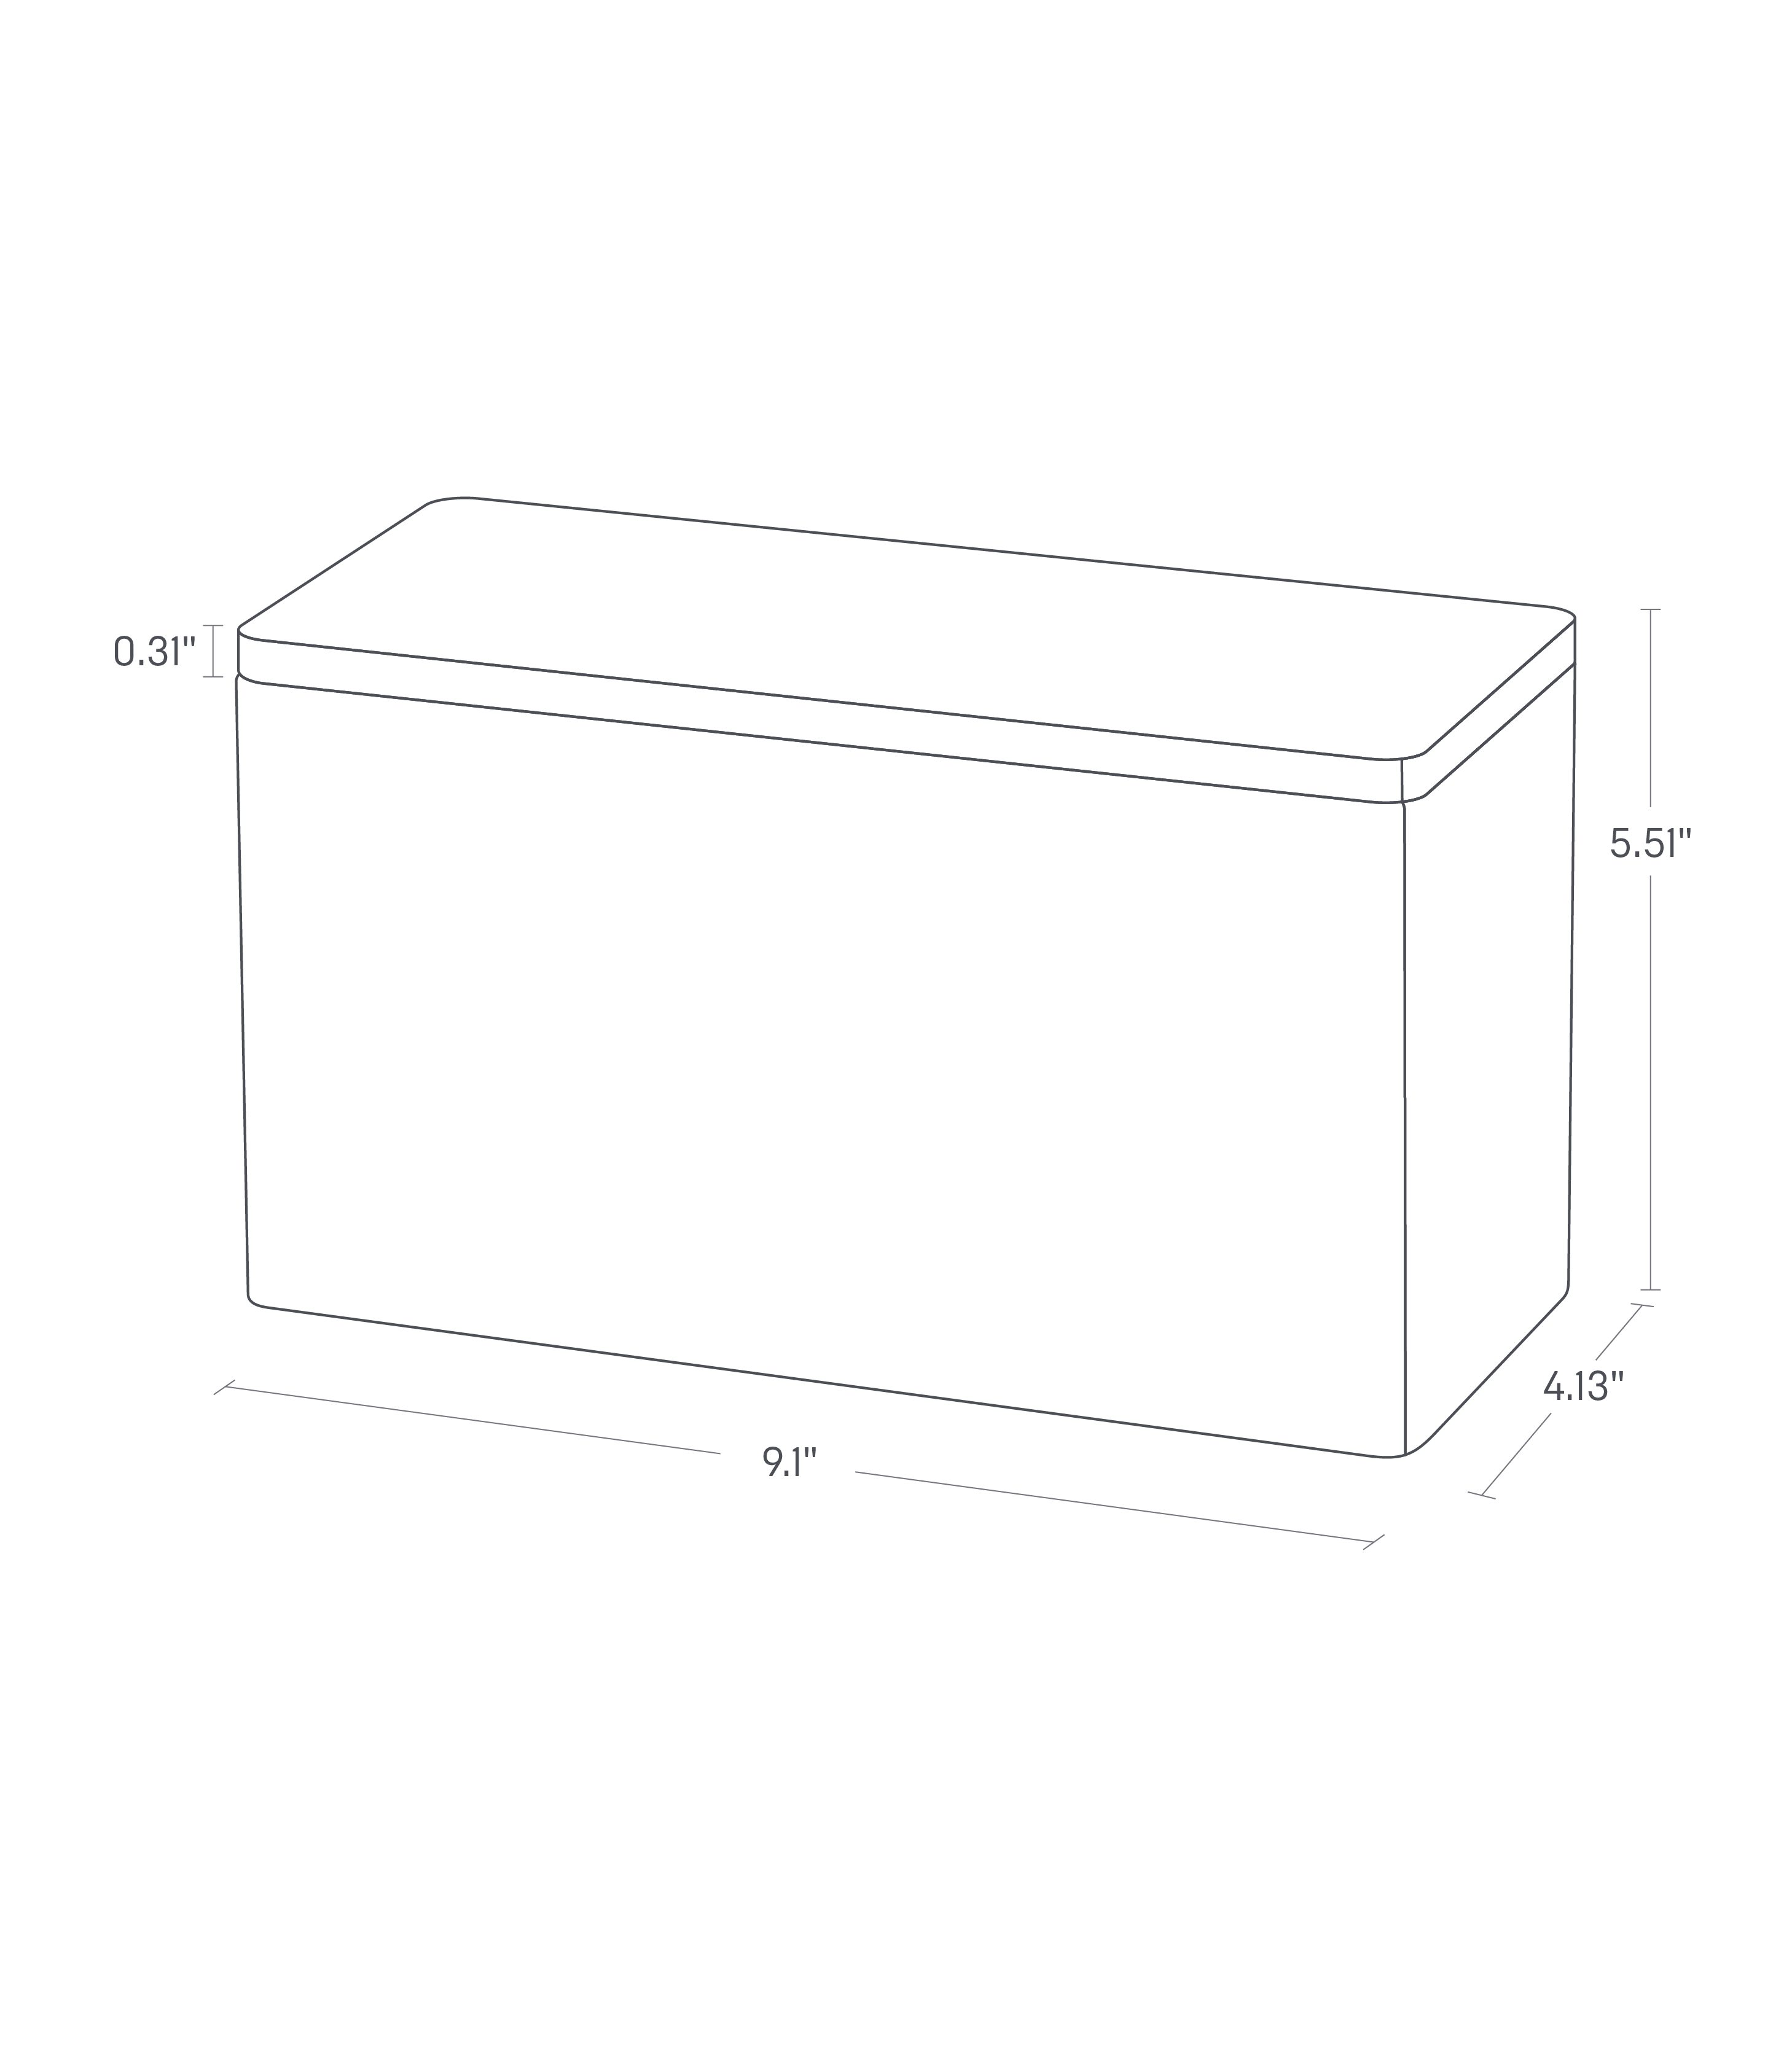 Dimension image for Countertop Organizer on a white background including dimensions  L 4.13 x W 9.06 x H 5.51 inches